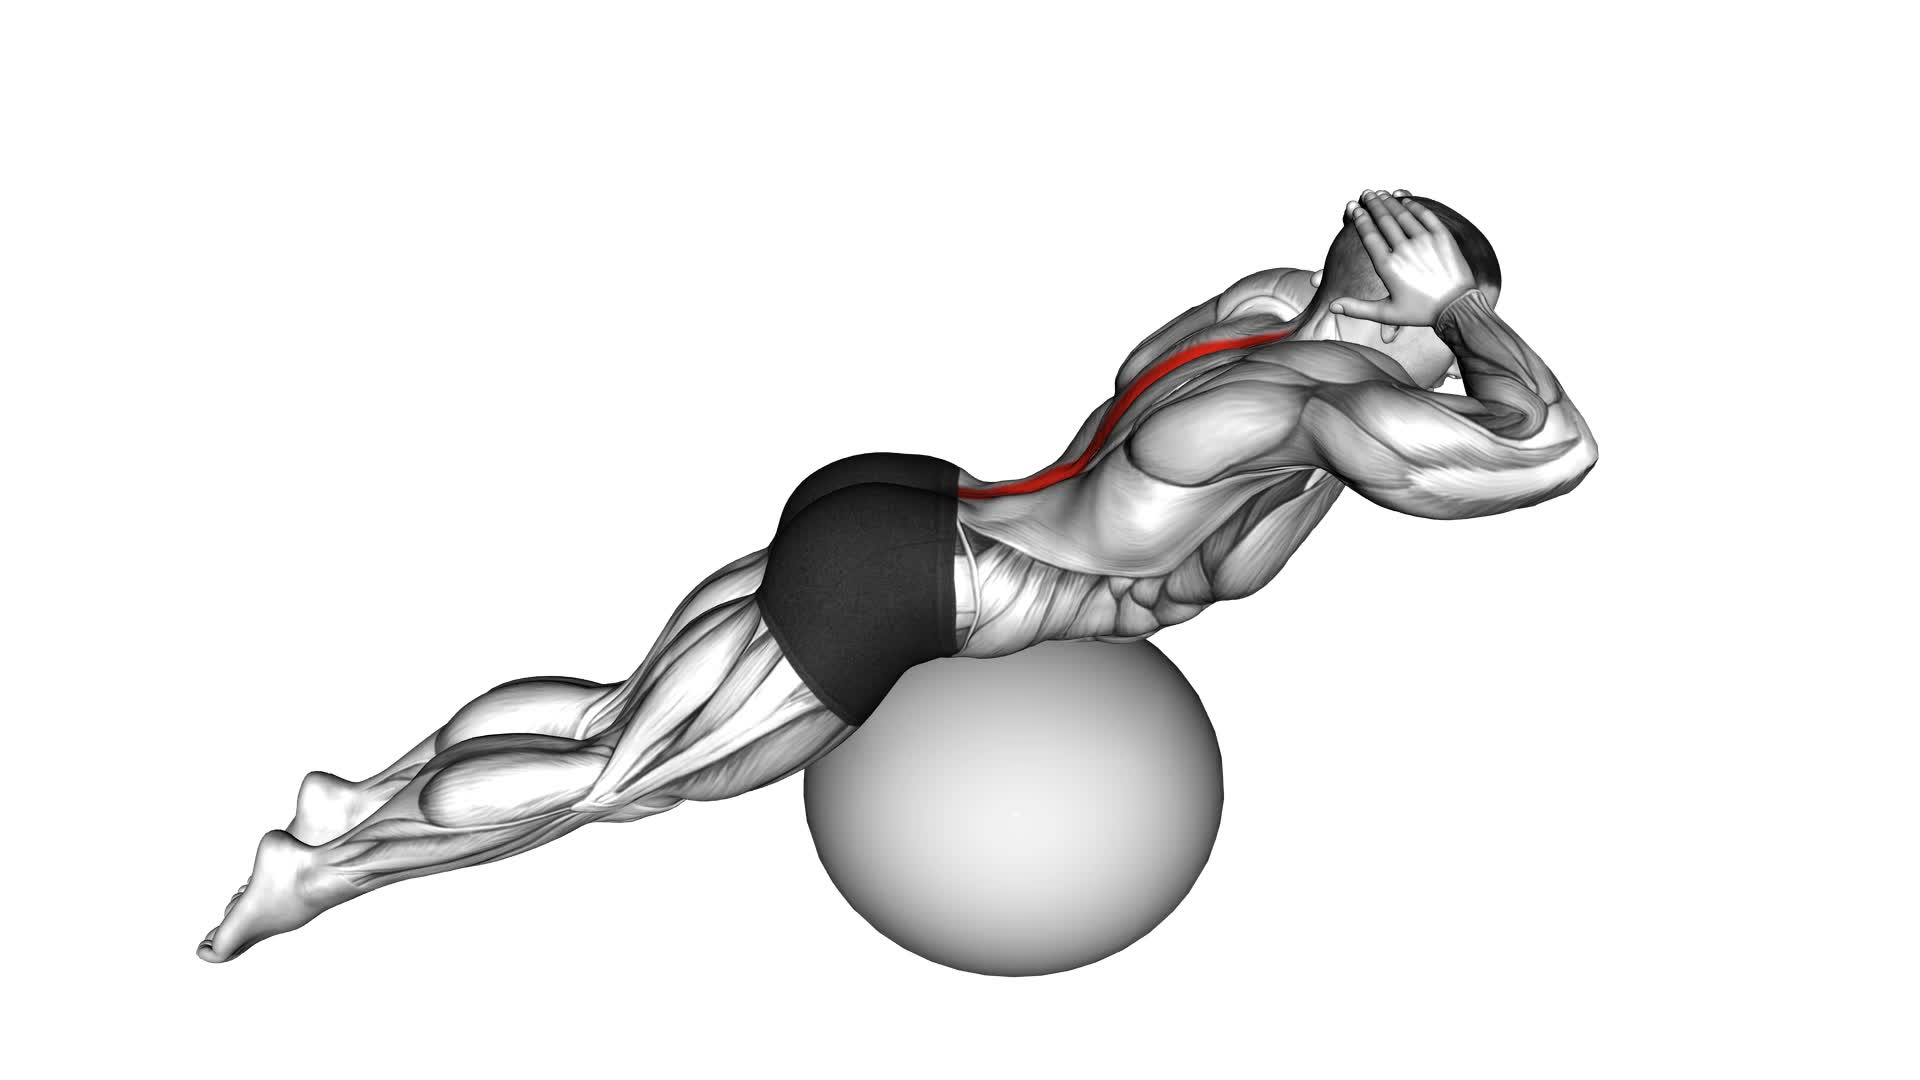 Back Extension on Exercise Ball - Video Exercise Guide & Tips